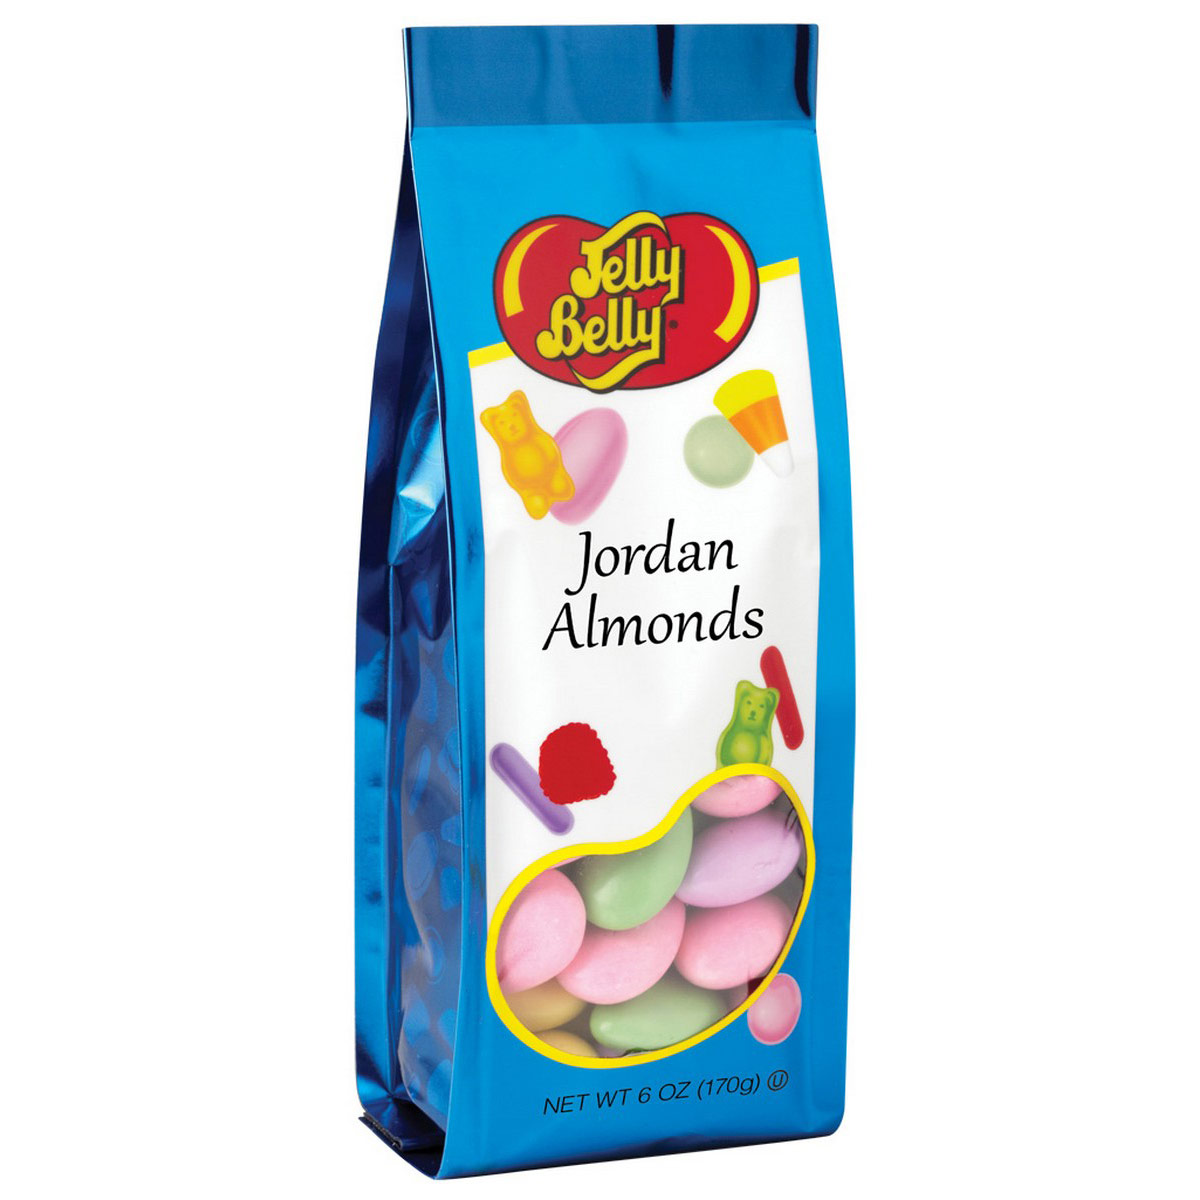 Candy-Covered Nuts: Jordan Almonds, Chocolate Almonds